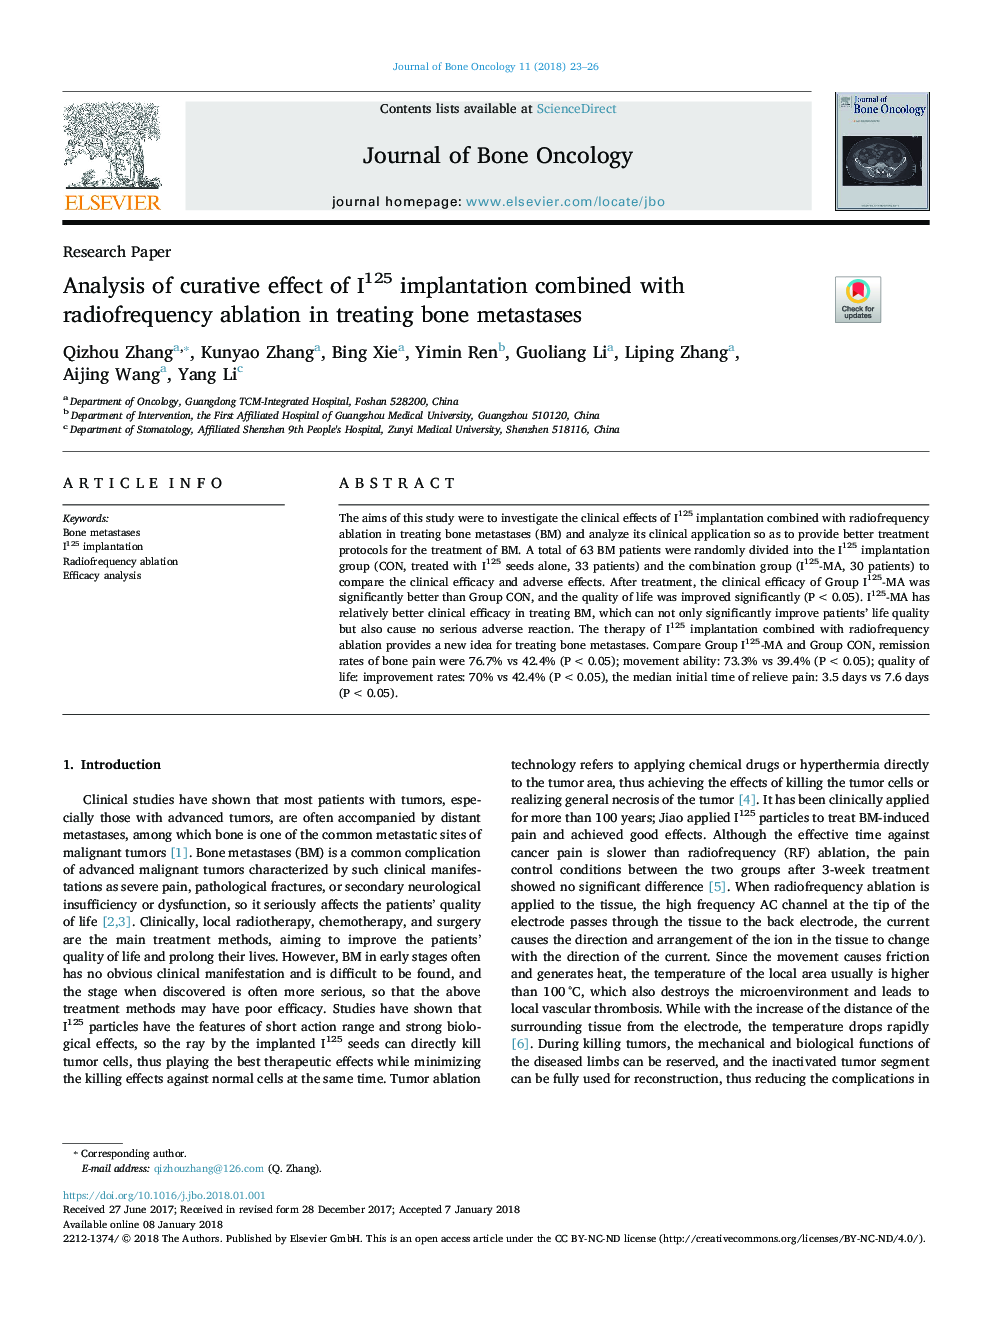 Analysis of curative effect of I125 implantation combined with radiofrequency ablation in treating bone metastases